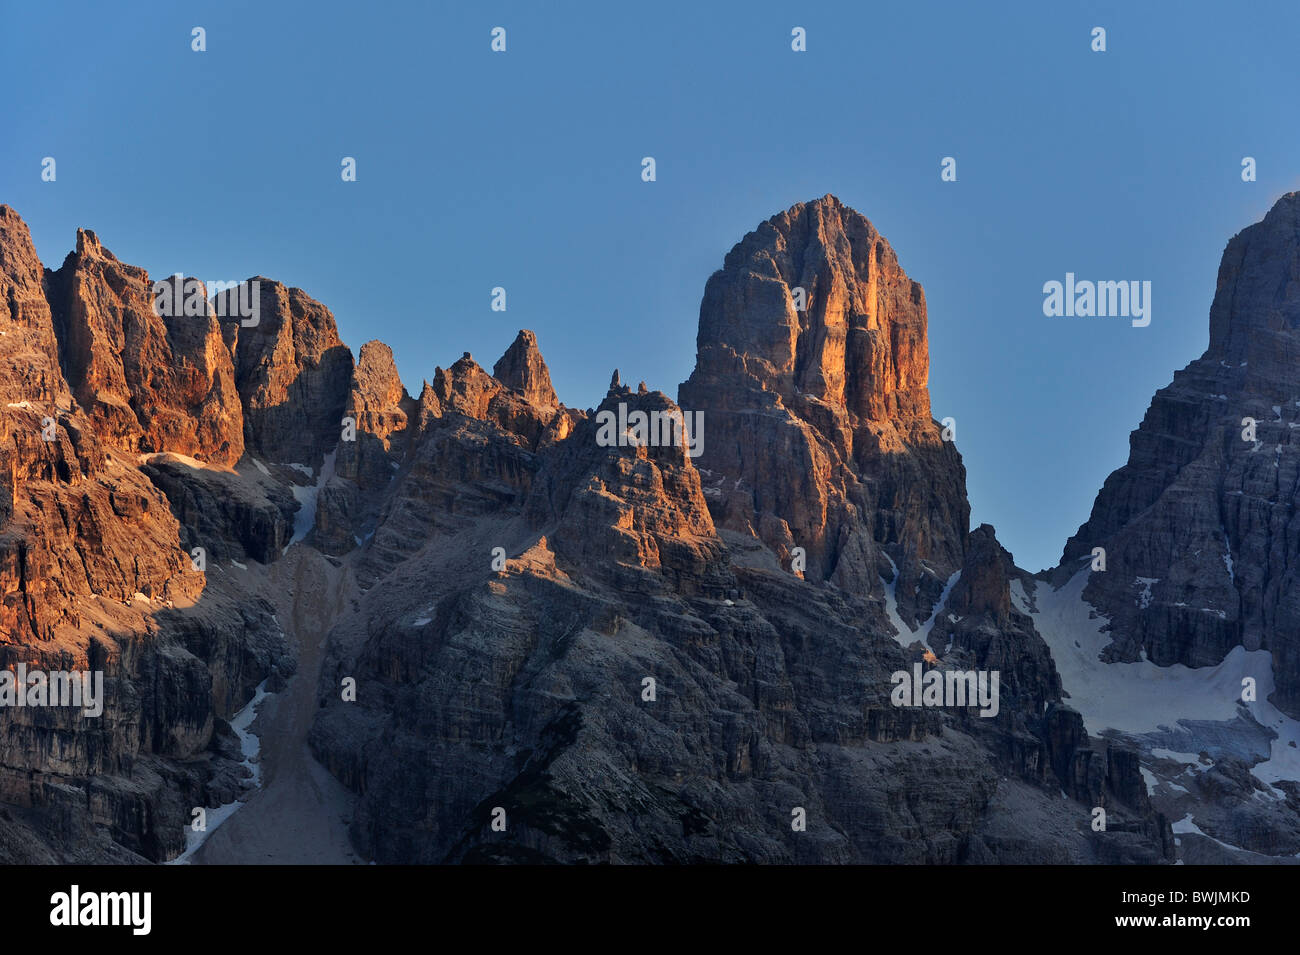 Alpenglow at sunset over the mountain Monte Cristallo in the Dolomites, Italy Stock Photo